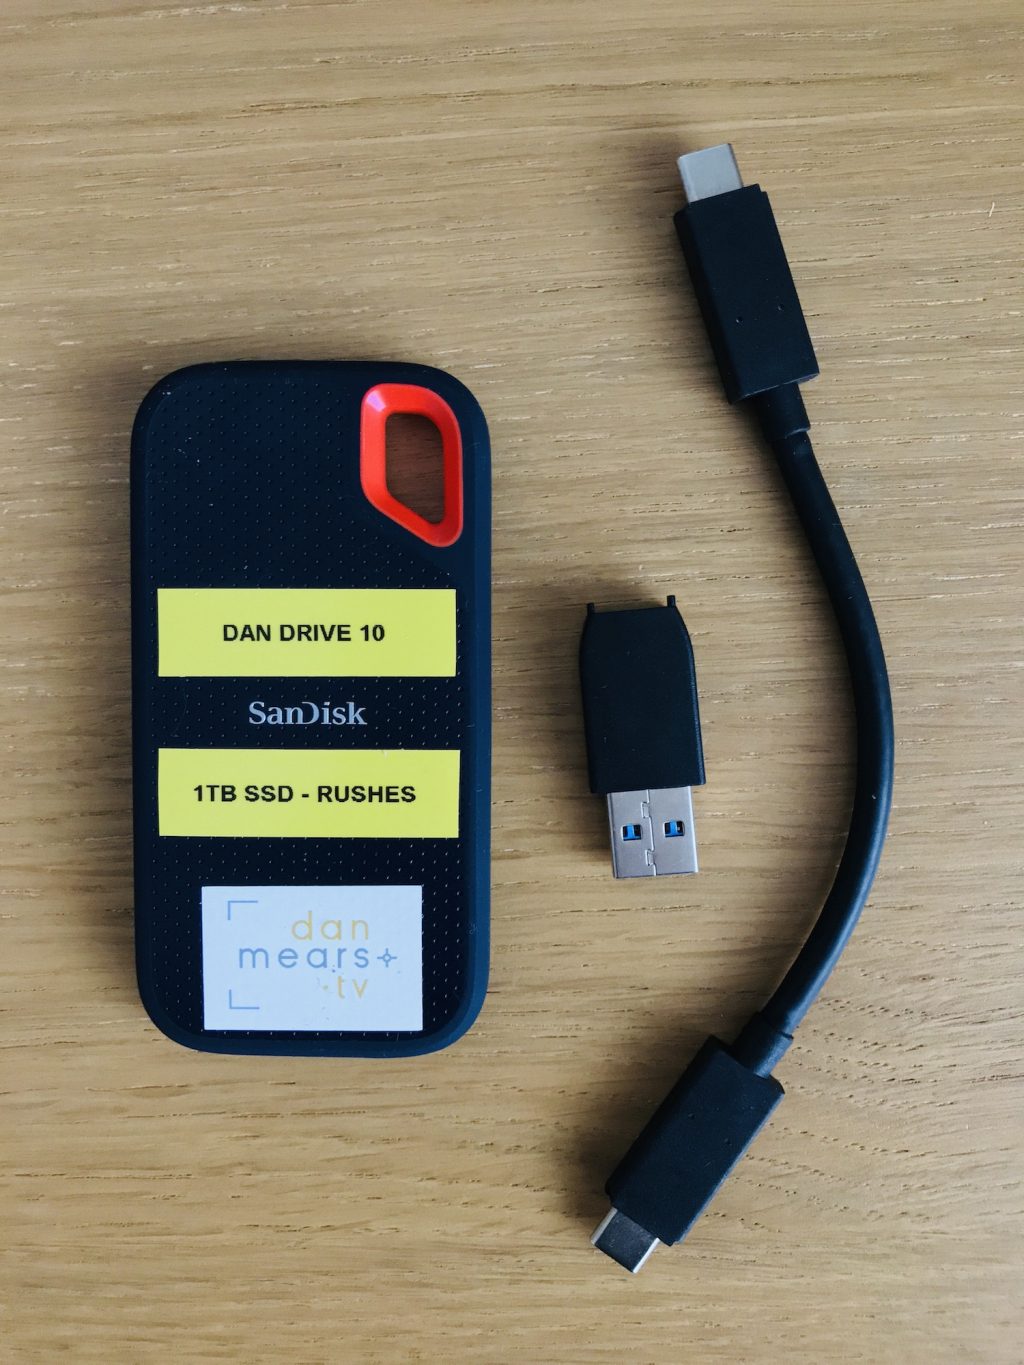 SanDisk Portable SSD and Cables